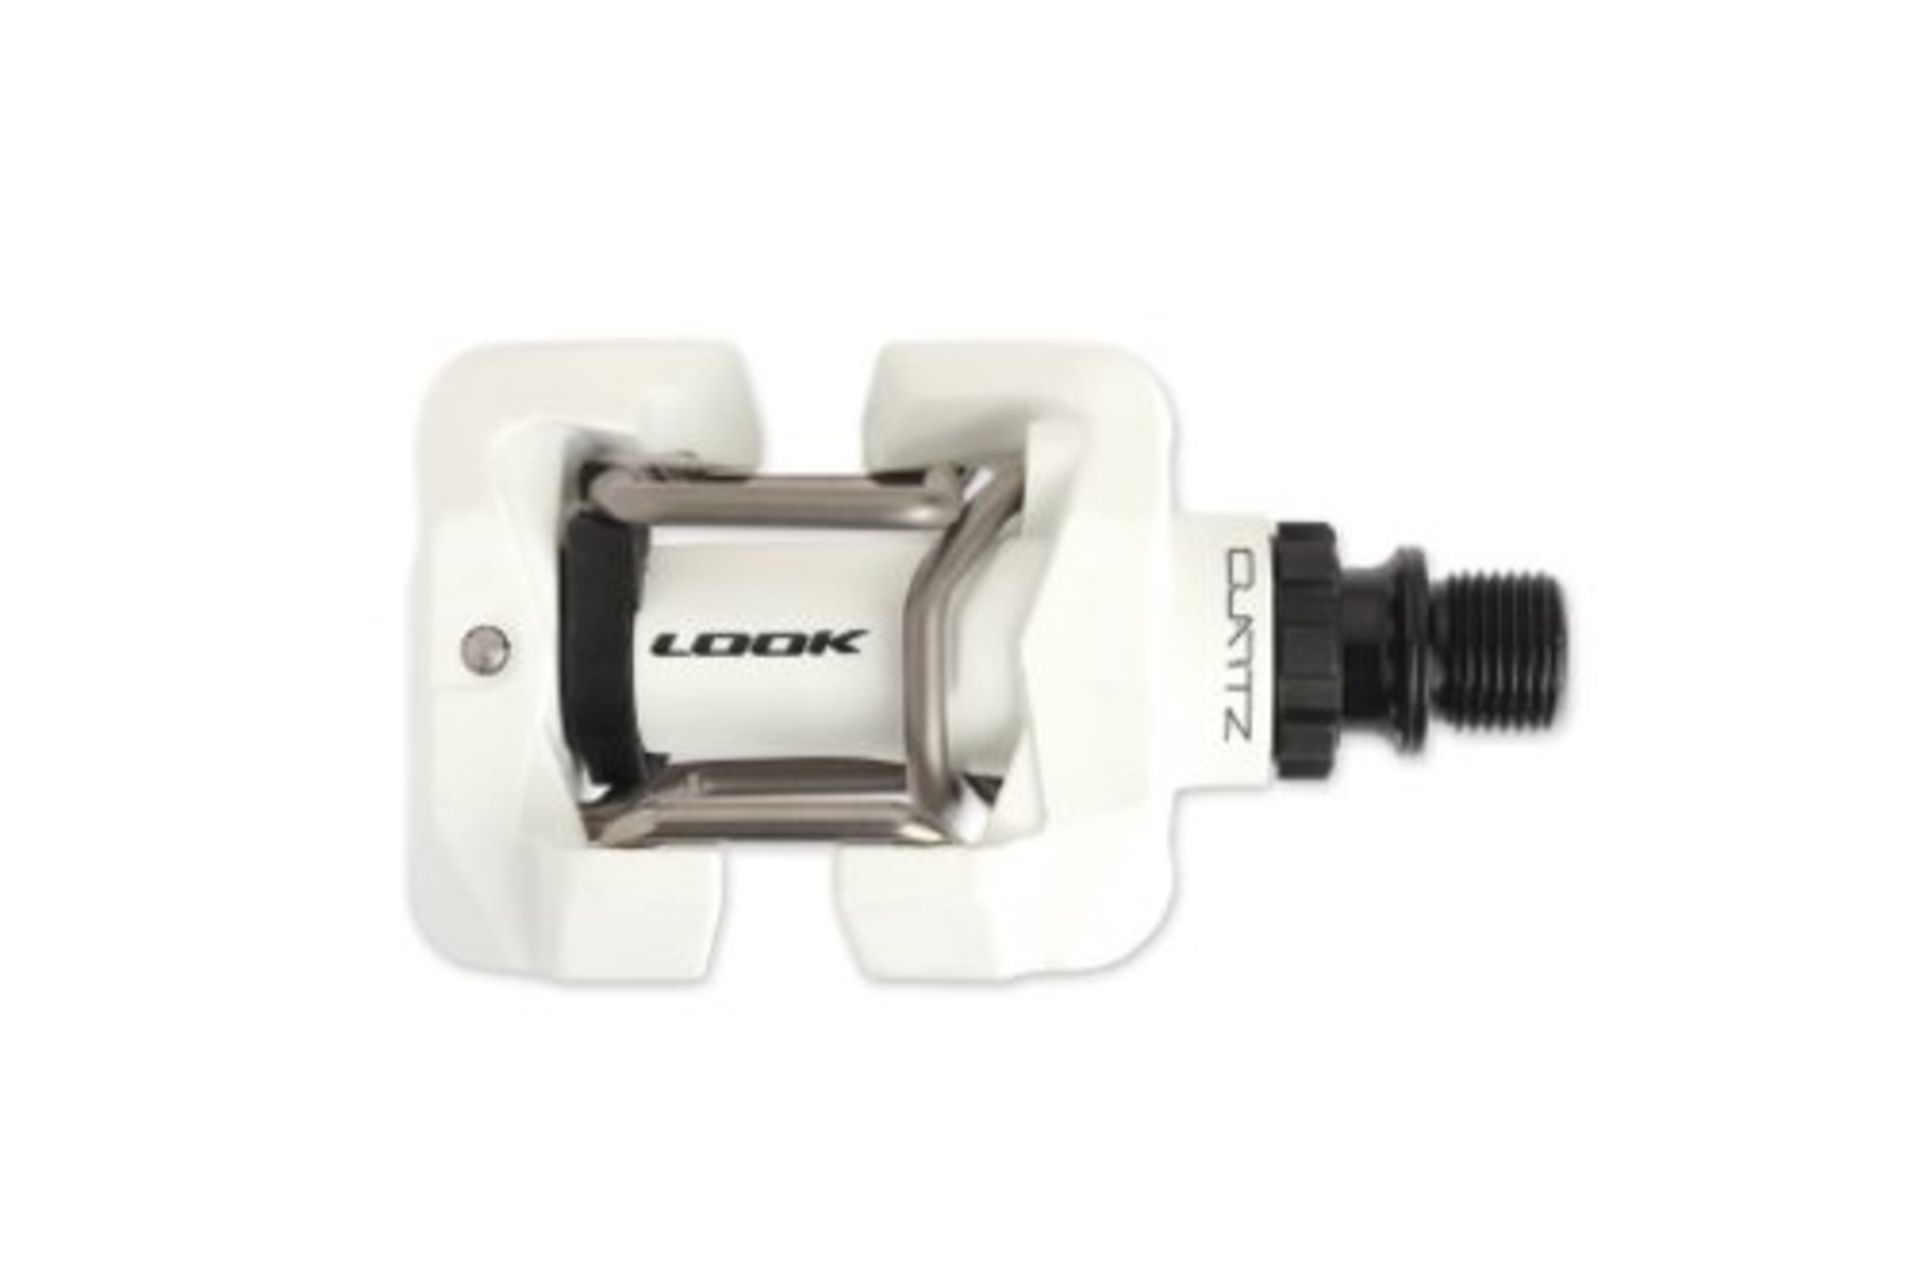 Look Quartz Pedal Cromo Axle with Cleat in White | RRP £40.00